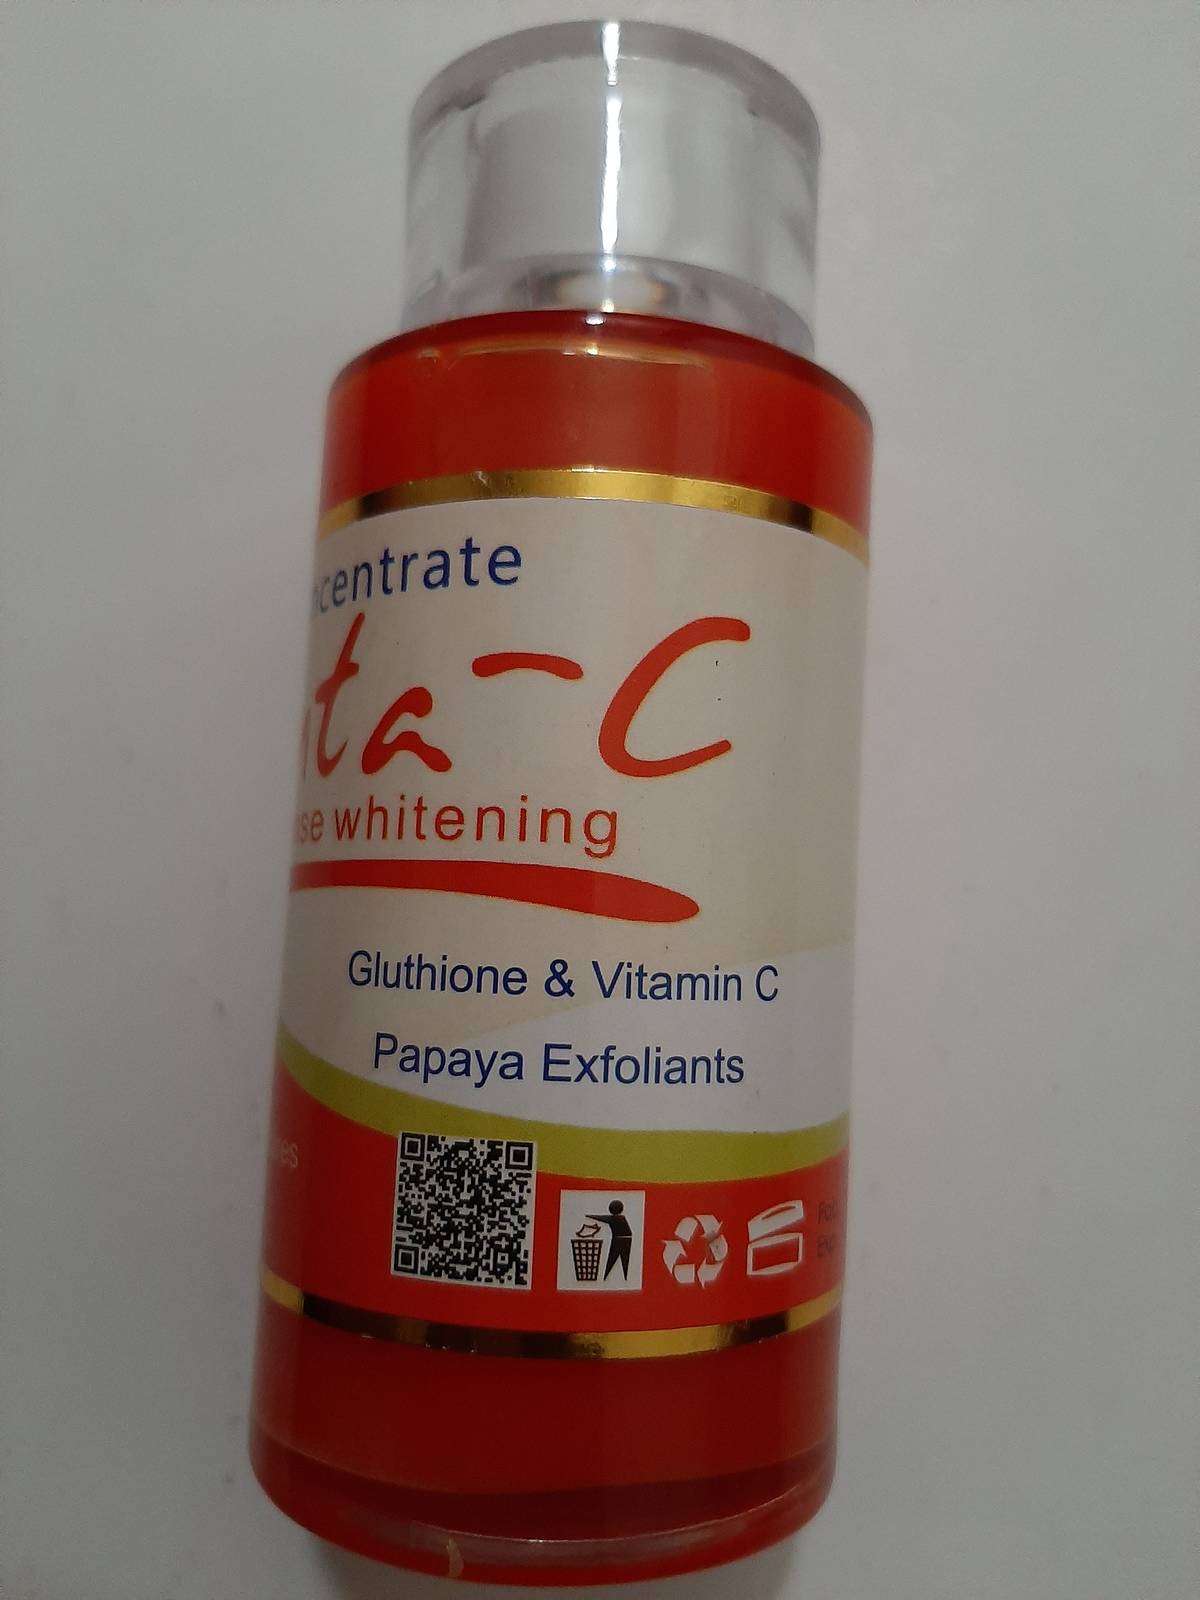 Gluta-c intense whitening concentrate with Glutathione, vitamin and papaya exfol